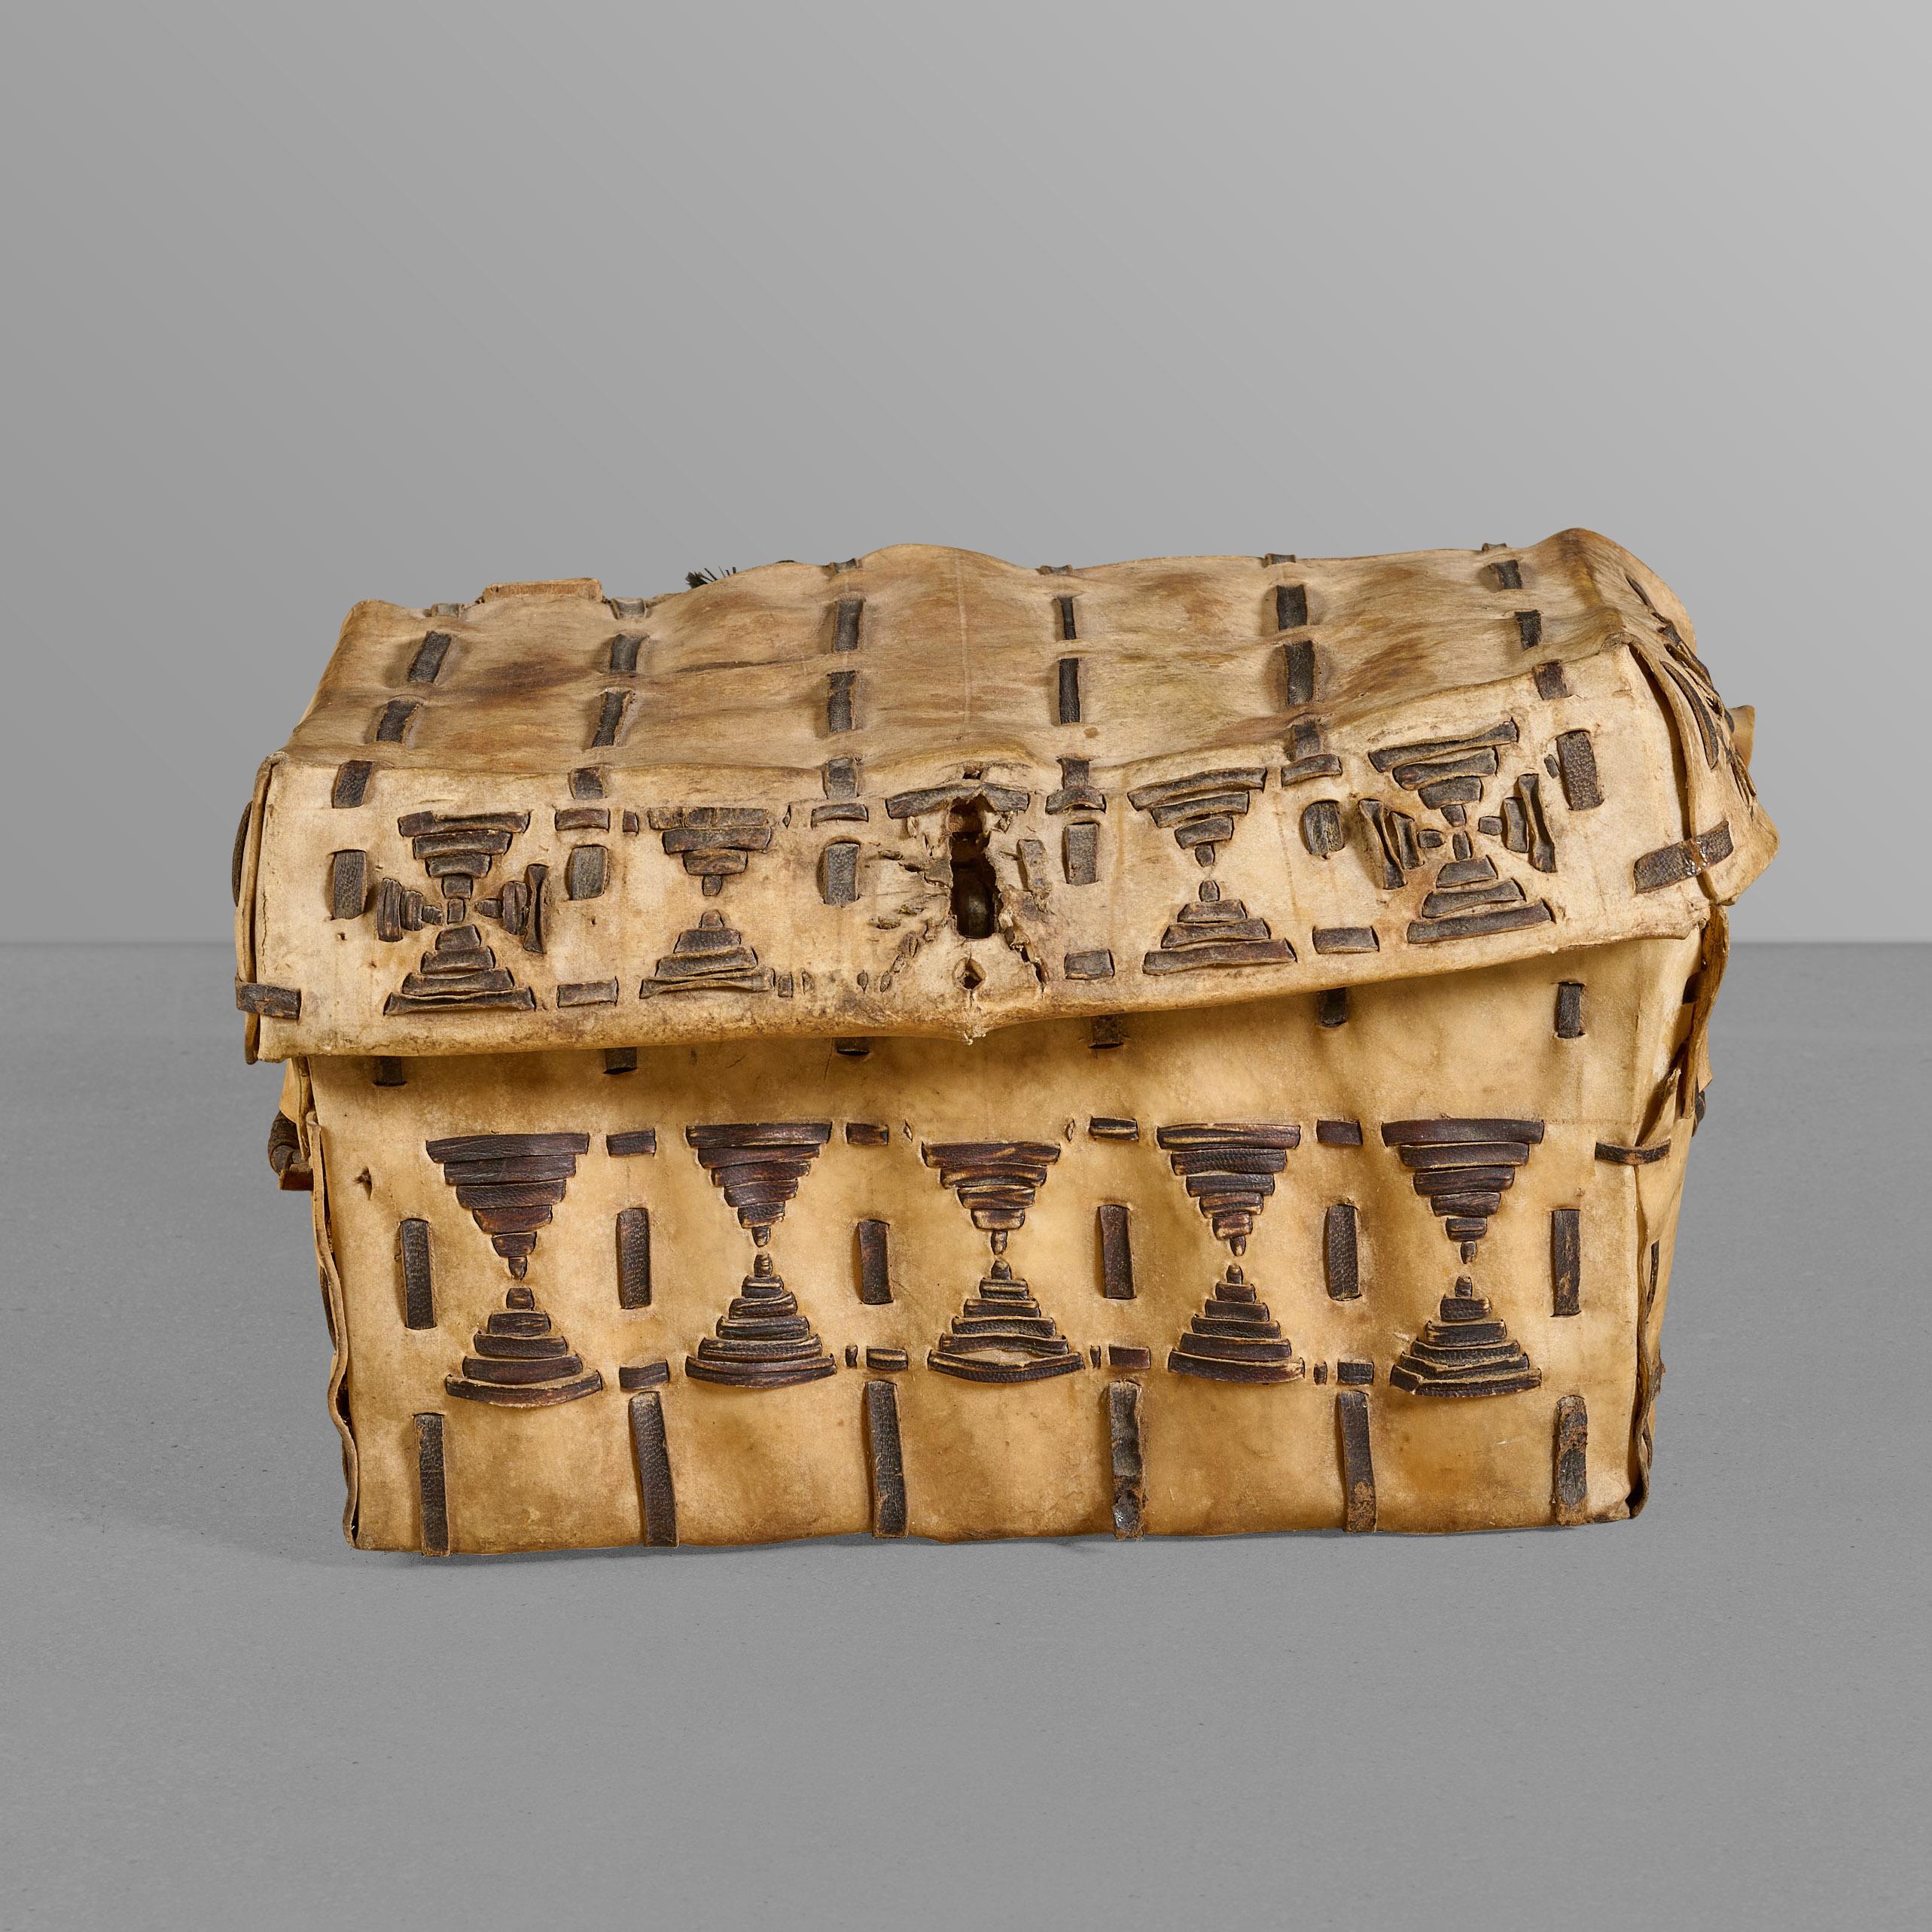 Small hide trunk with decorative stitching. Made by Gauchos for storage. Great style and quality.